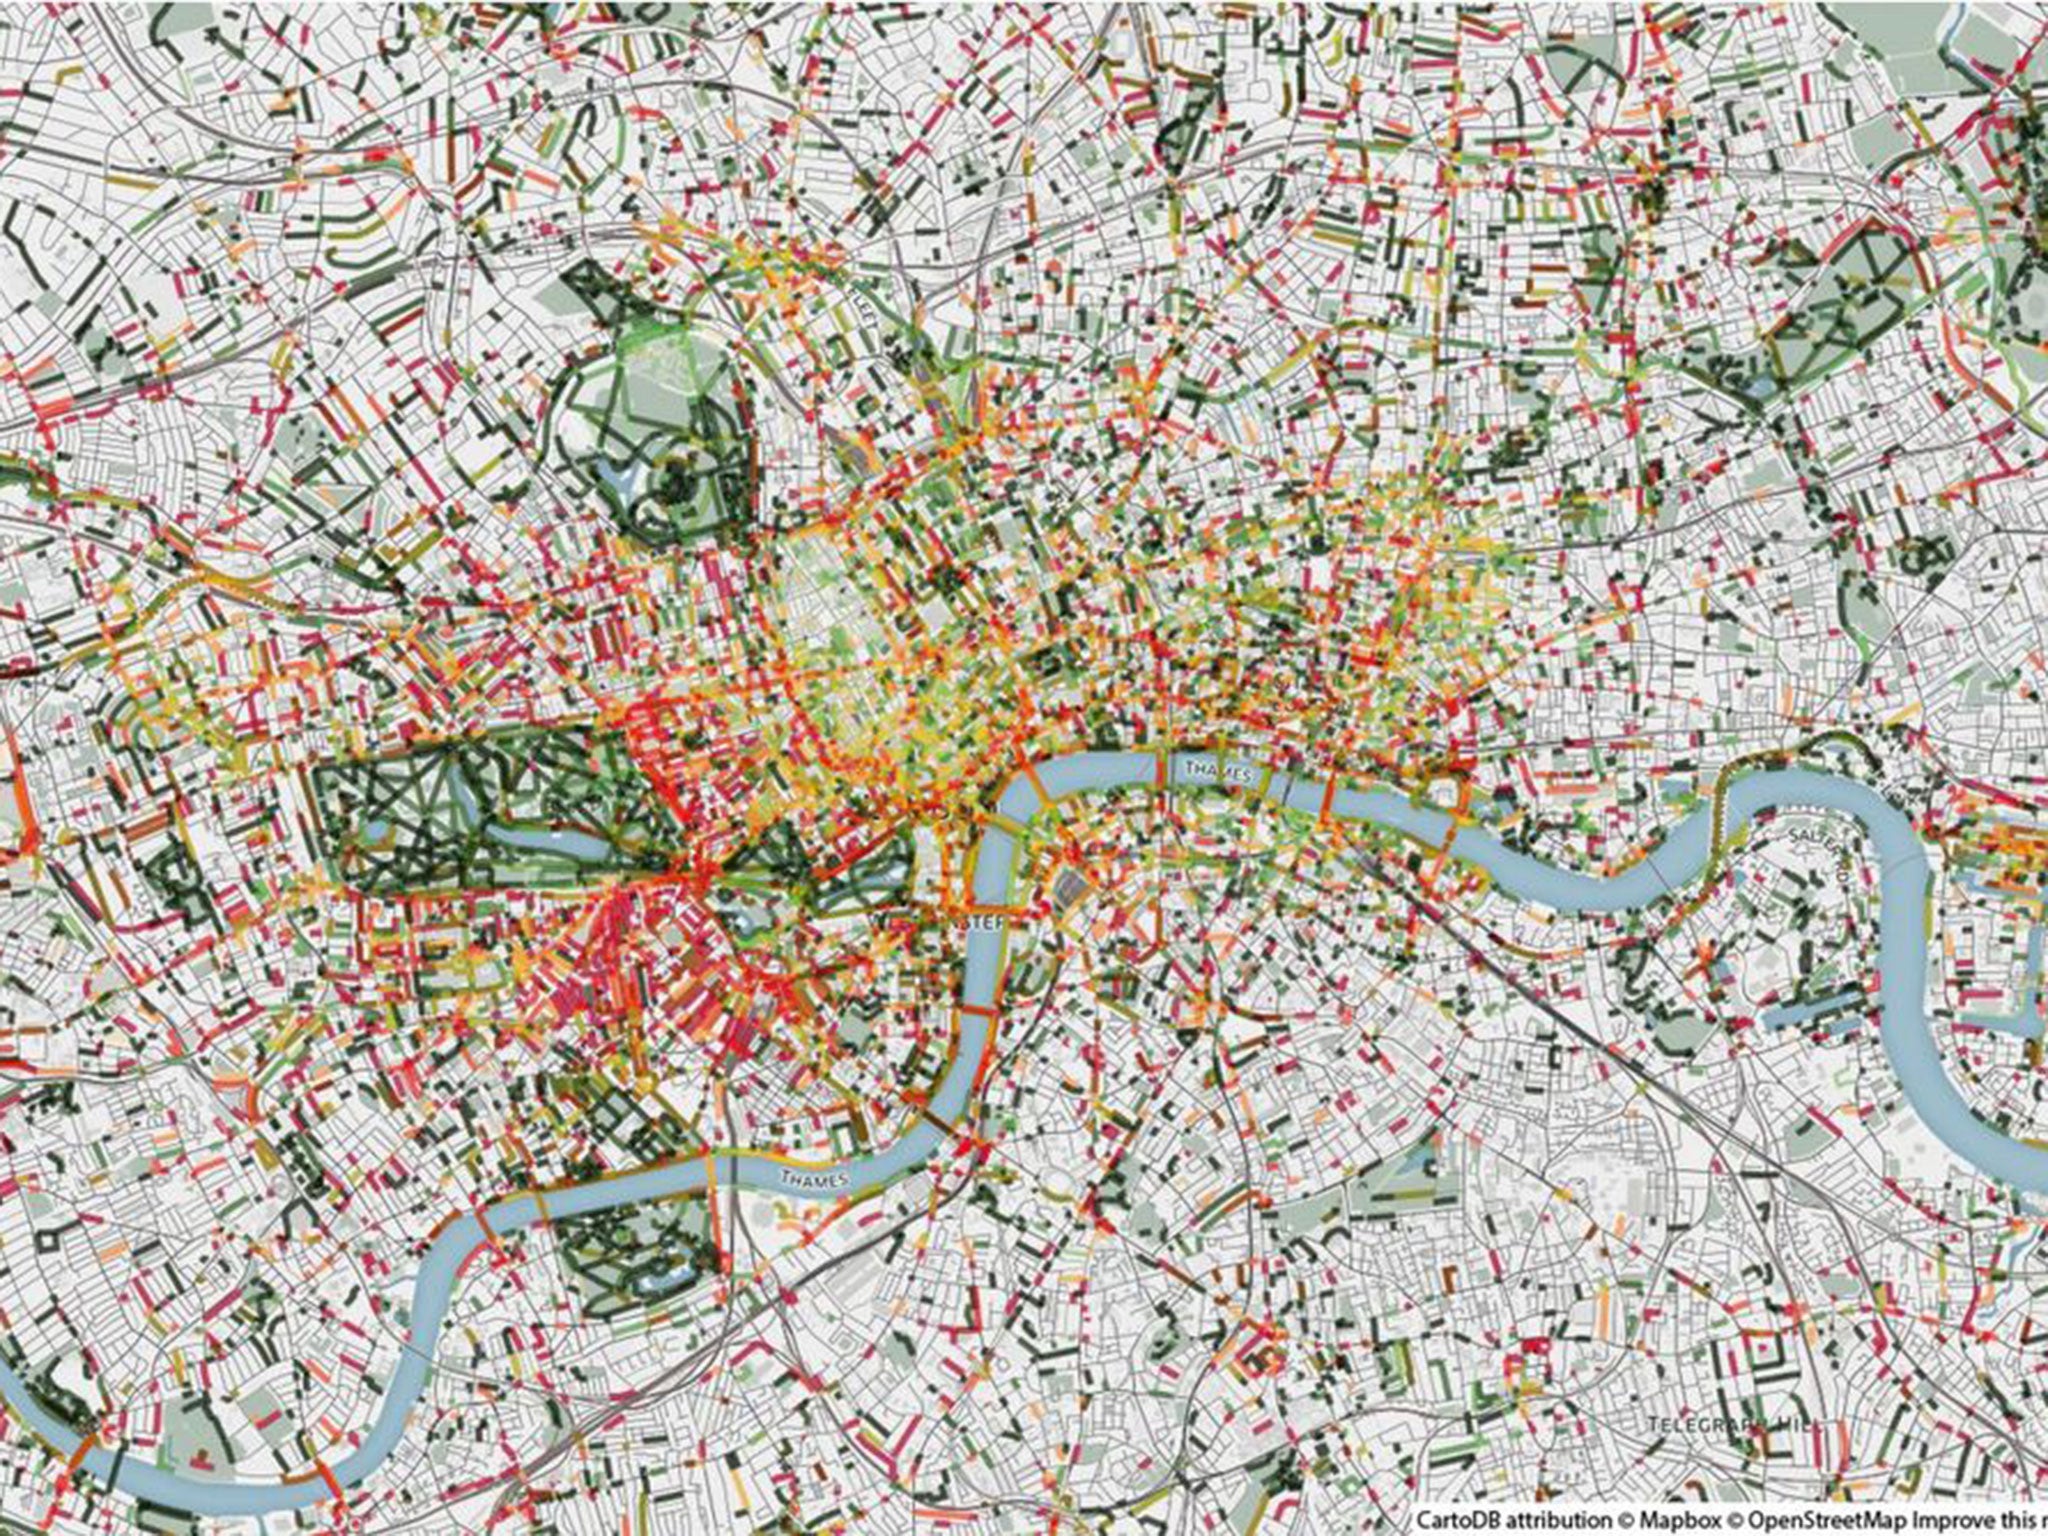 On the nose: a smell map showing emissions in London